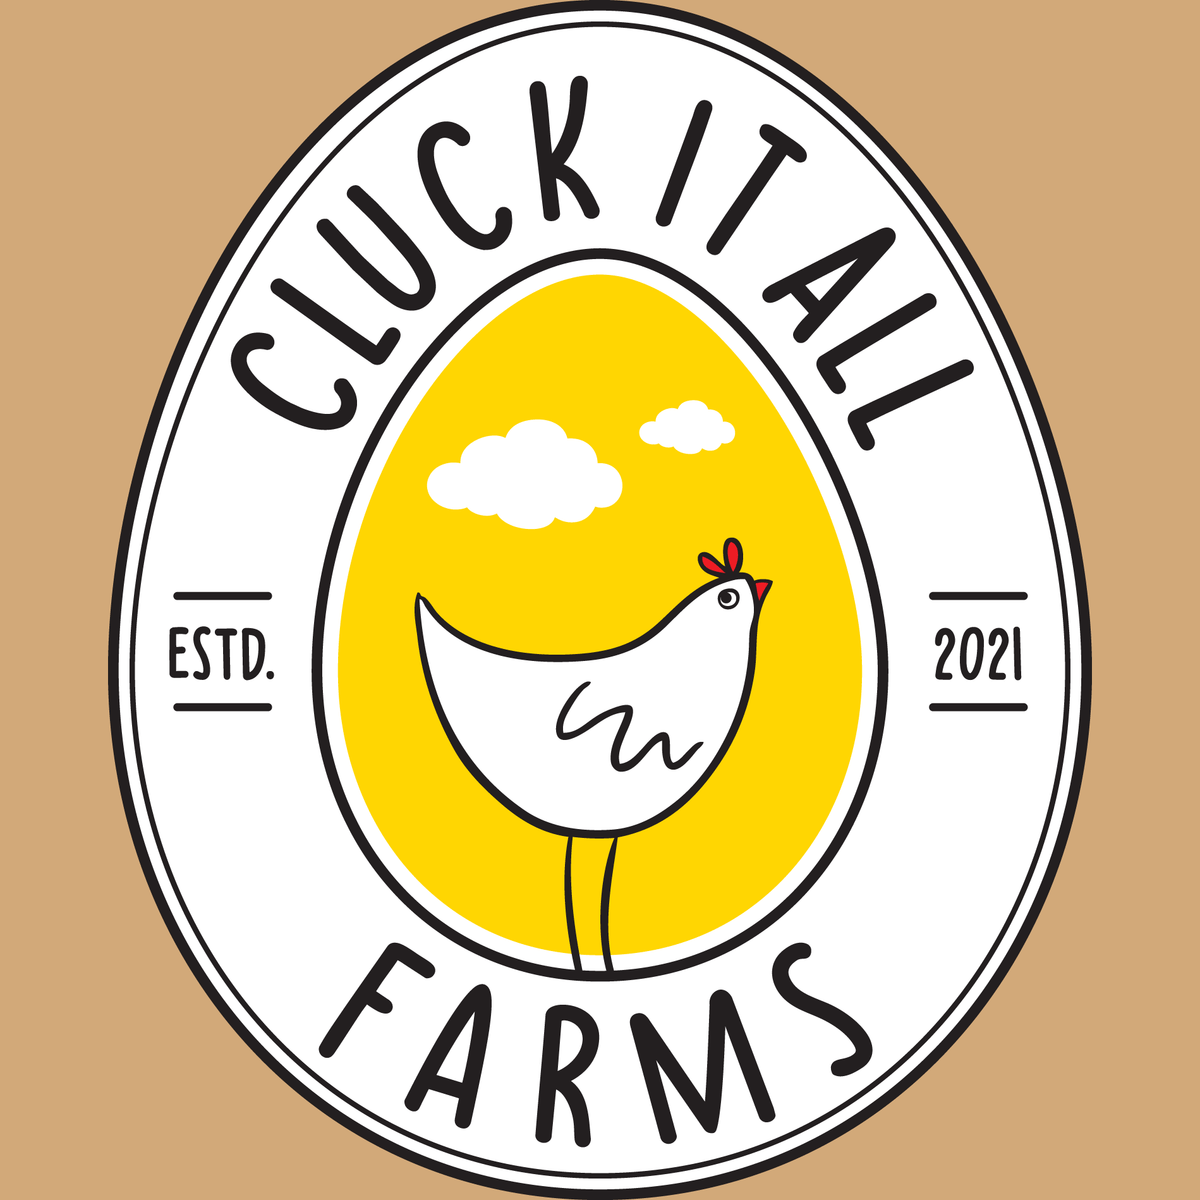 Cluck It All Farms Gift Certificate: Give the Clucking Perfect Gift! - Cluck It All Farms